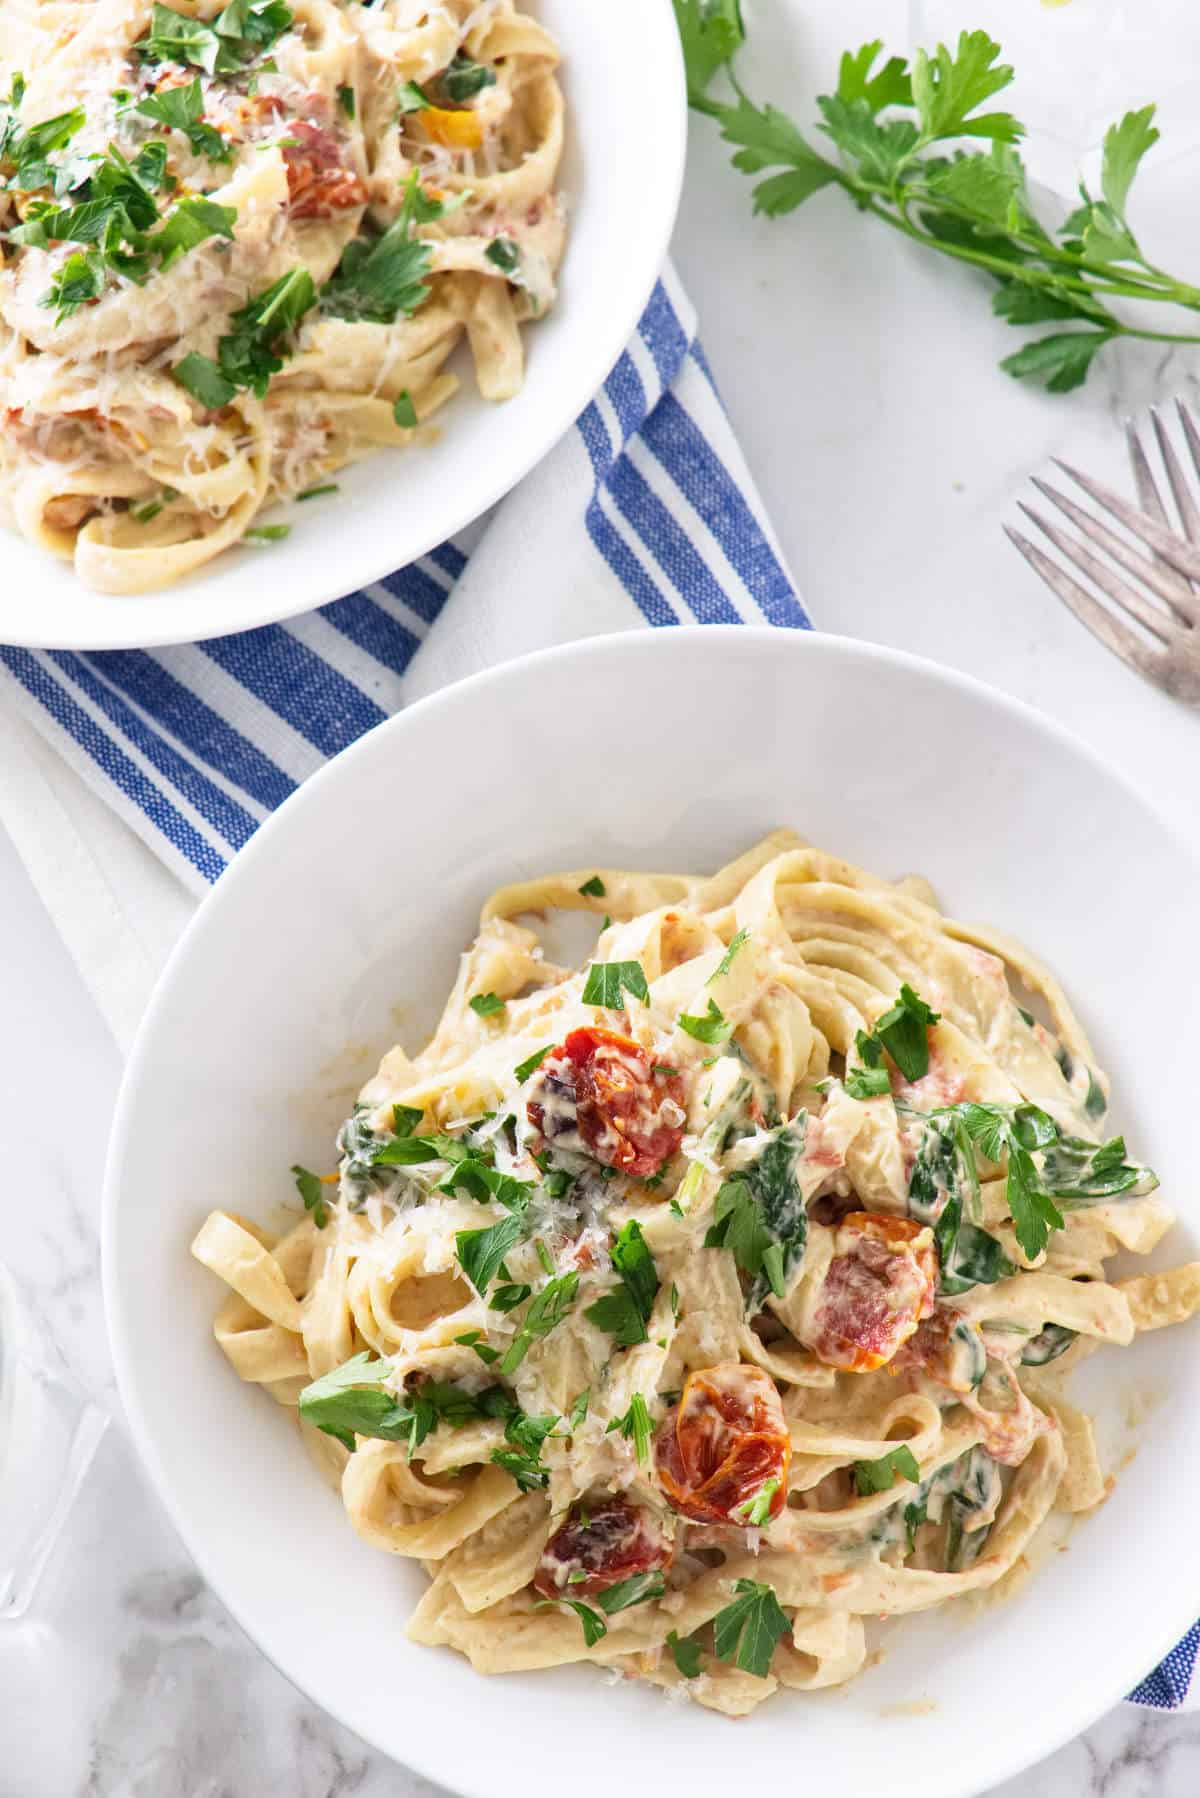 Spinach and Roasted Tomato Pasta with Cashew Cream Sauce - Savor the Best